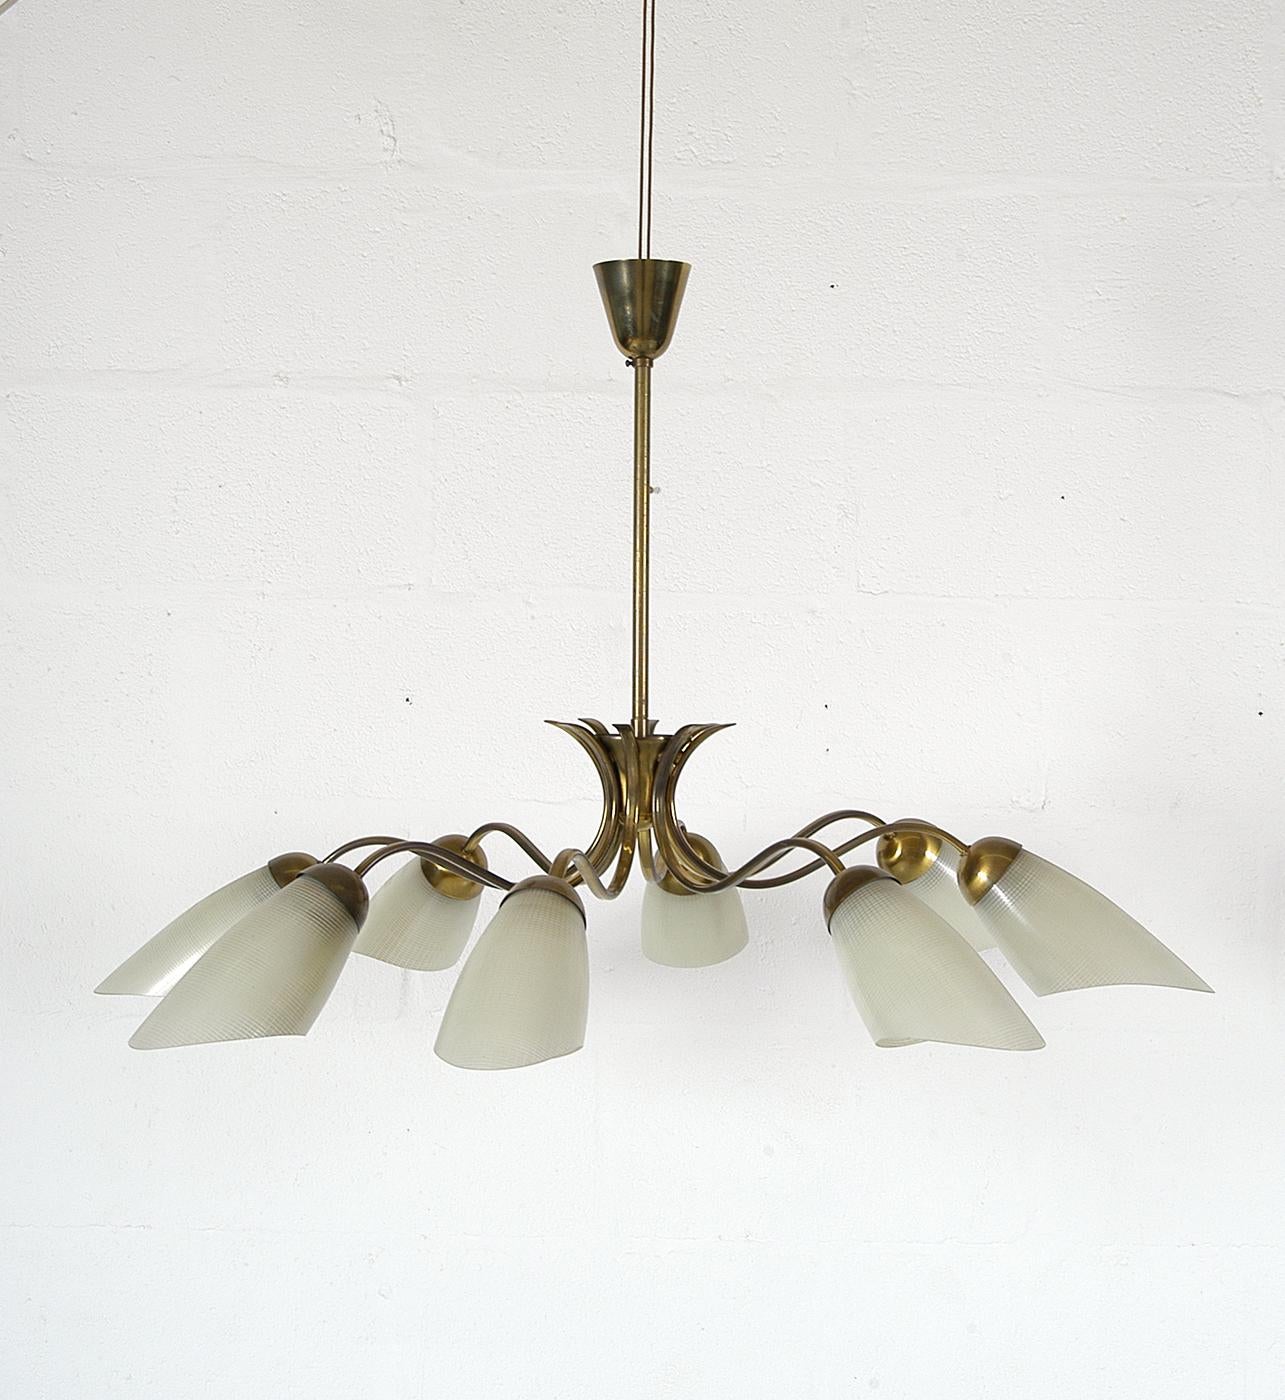 A lovely example of a 1950s Italian Mid-Century Modern chandelier comprising of eight curved brass arms emanating from the central shaft. Each arm supports a cream coloured curved glass ‘cheese-cloth’ textured shade.
The light has been fully